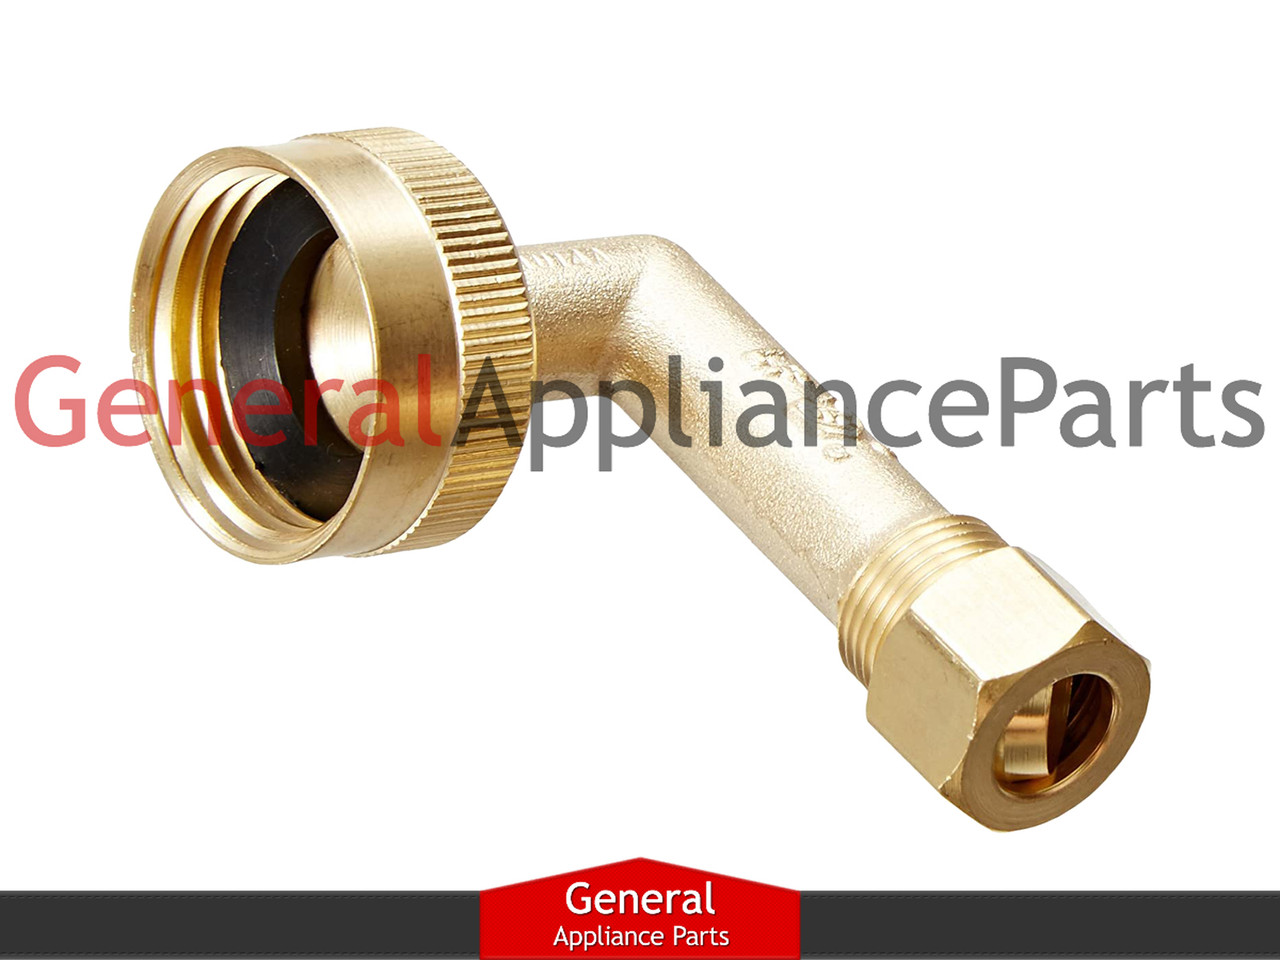 ClimaTek Dishwasher Water Valve Adapter replaces Whirlpool # W10273460BU  VI3460 - General Appliance Parts